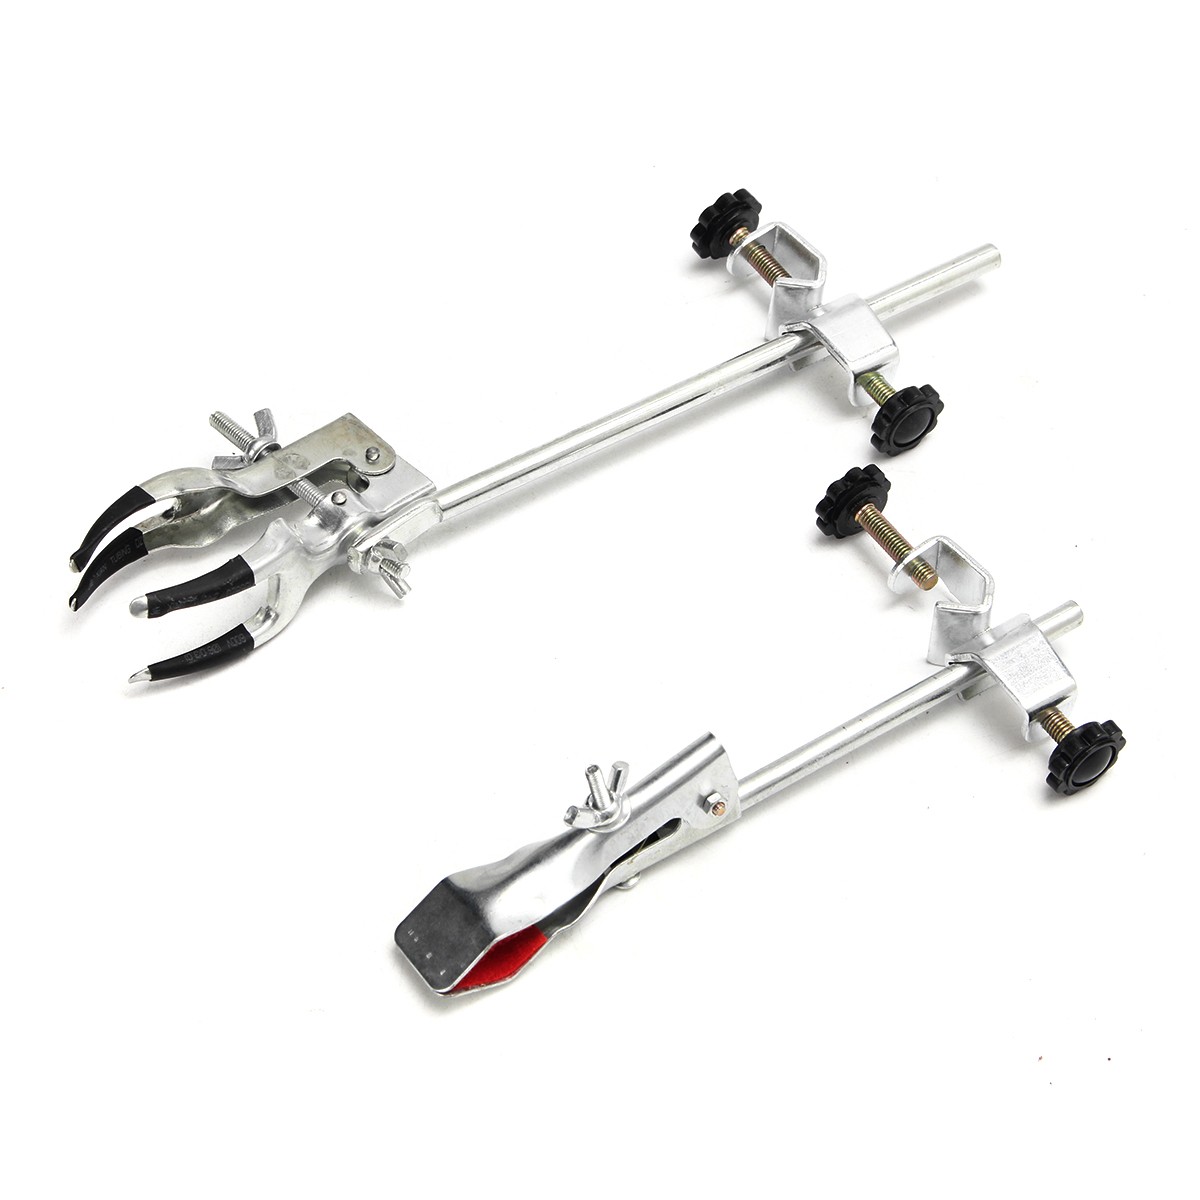 Laboratory-Stands-Support-Lab-Clamp-Flask-Clamp-Condenser-Clamp-Stand-Four-Prong-Extension-Flask-Cla-1410946-4